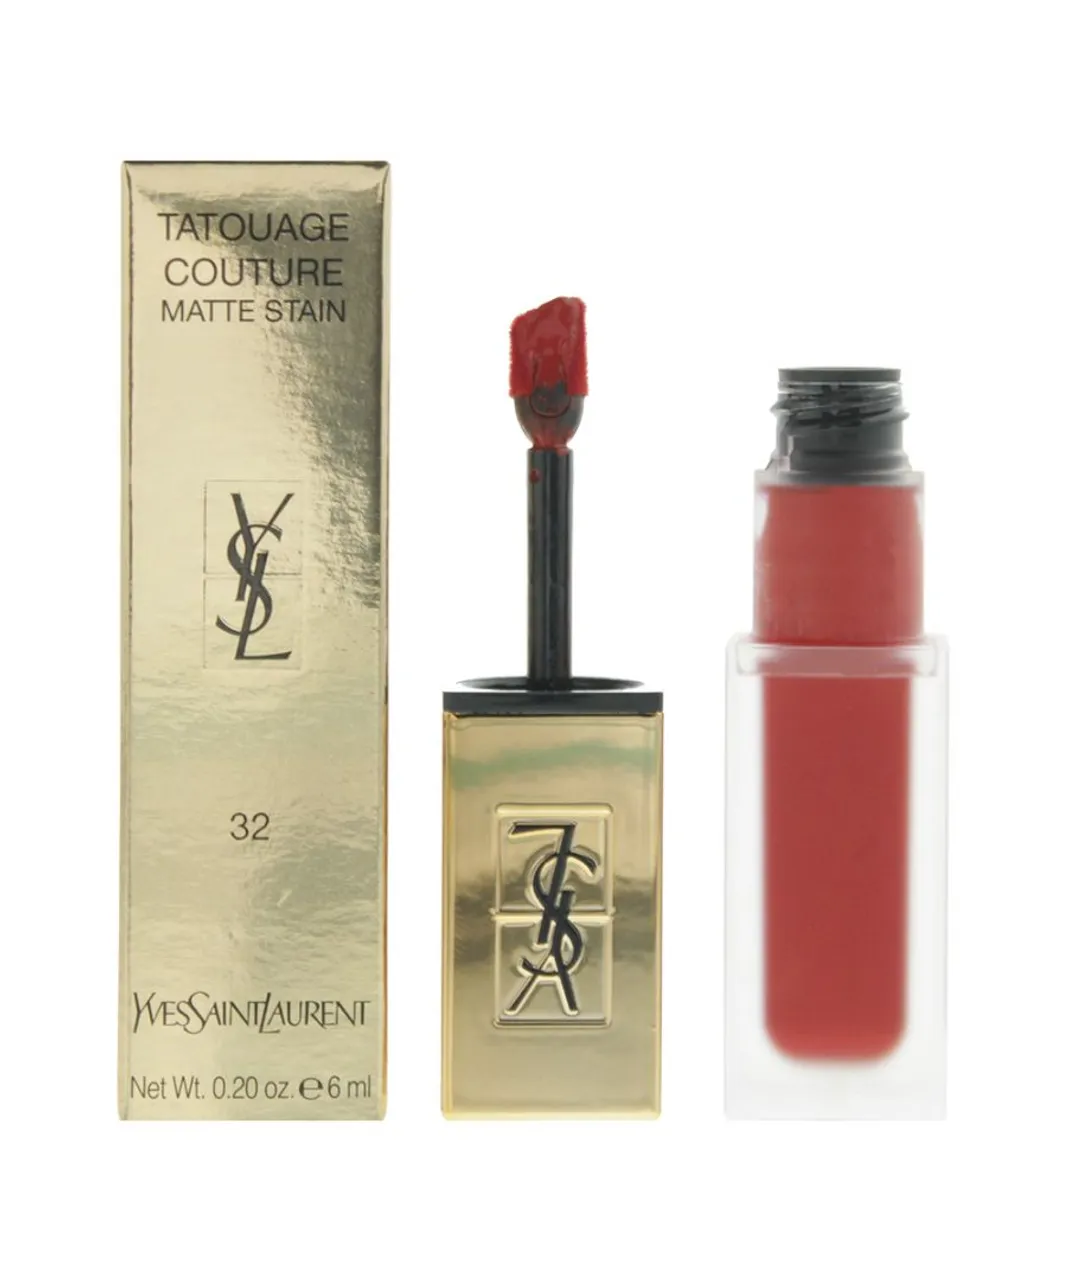 Yves Saint Laurent Unisex Tatouage Couture Matte Stain 6ml - 32 Feel Me Thrilling - NA - One Size